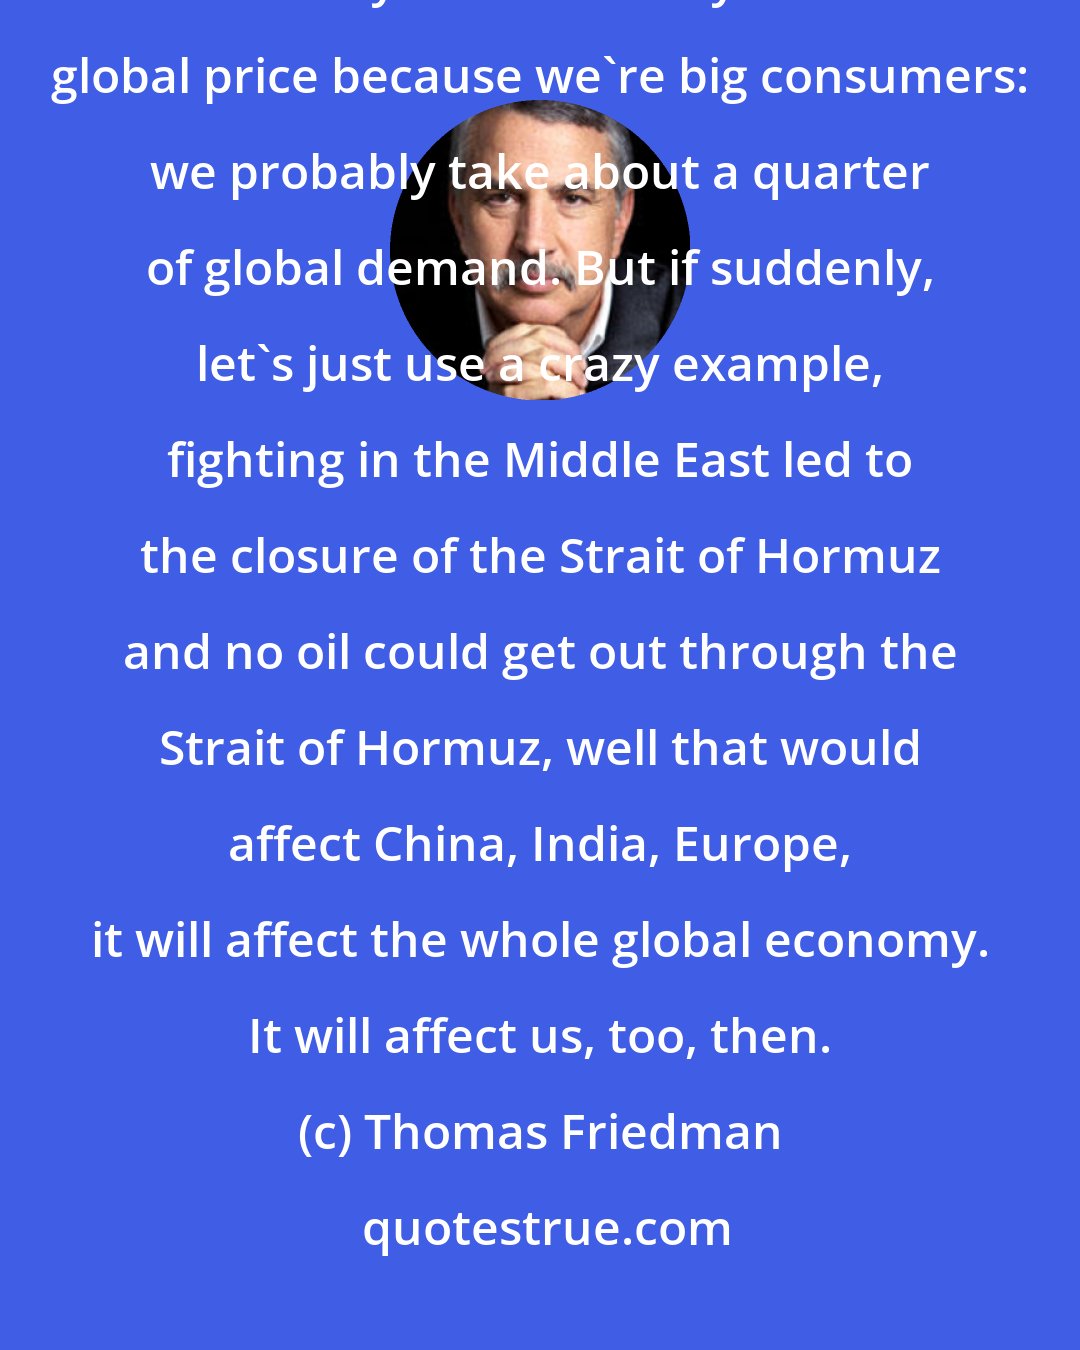 Thomas Friedman: Oil is a tangible commodity, so there is a global market. The fact that we may need less may affect the global price because we're big consumers: we probably take about a quarter of global demand. But if suddenly, let's just use a crazy example, fighting in the Middle East led to the closure of the Strait of Hormuz and no oil could get out through the Strait of Hormuz, well that would affect China, India, Europe, it will affect the whole global economy. It will affect us, too, then.